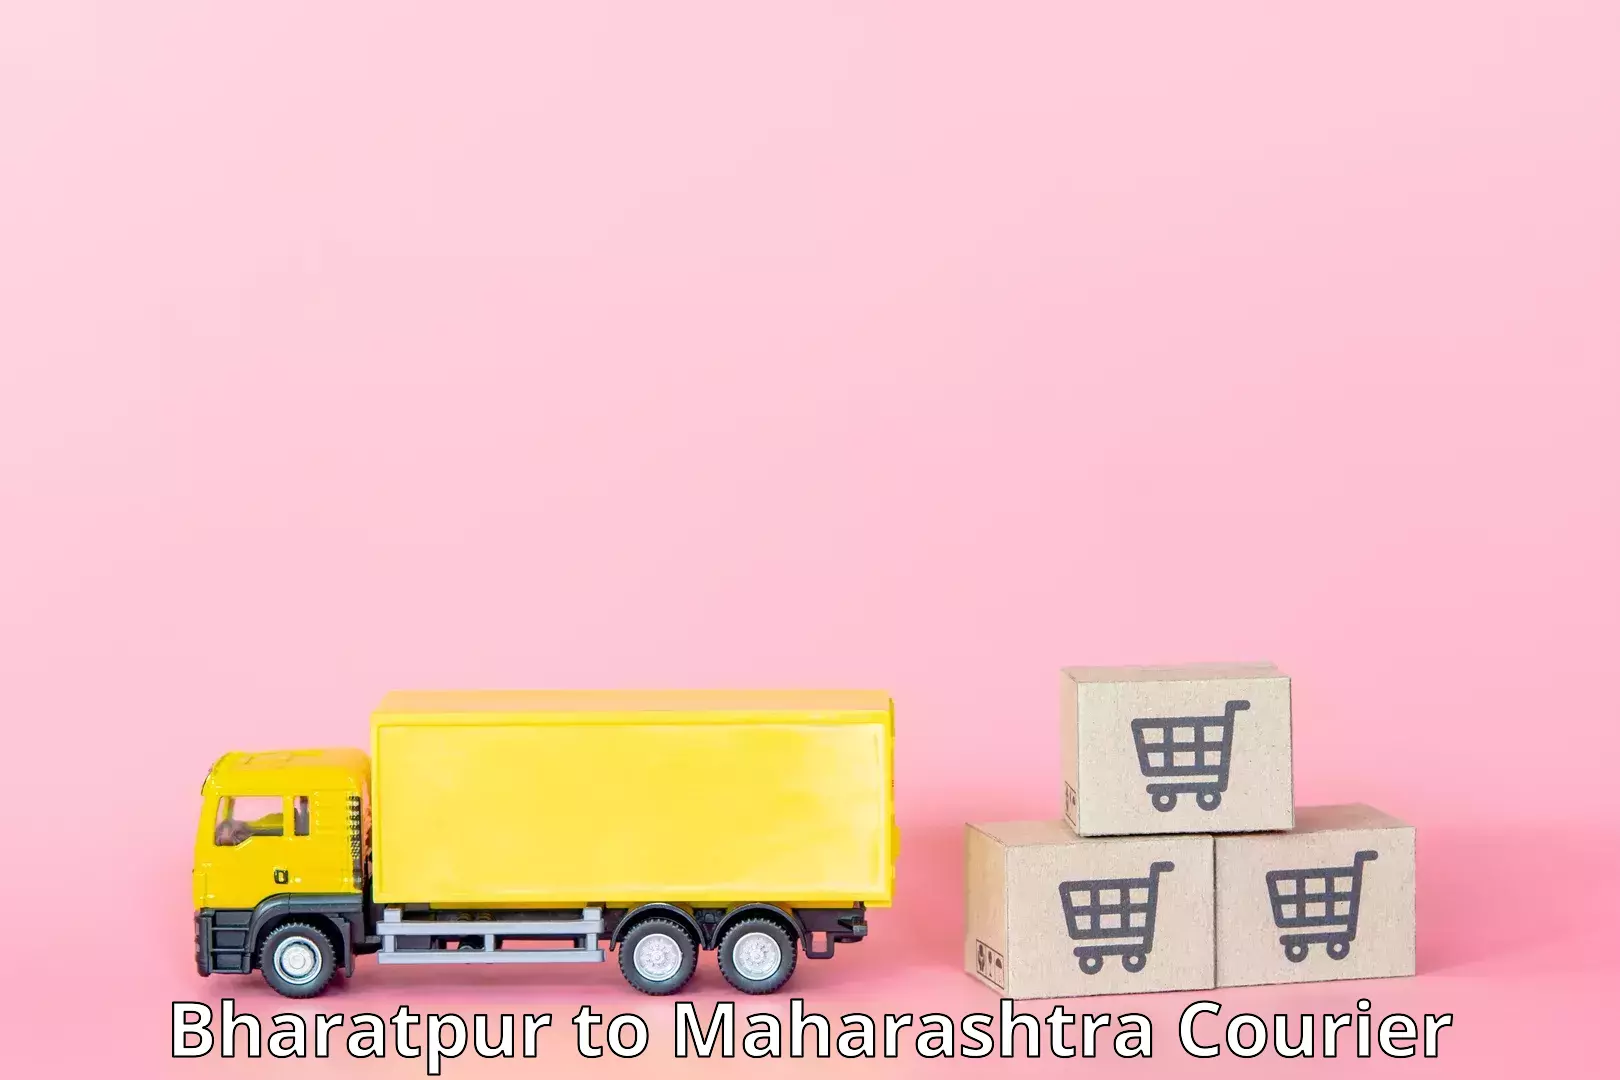 Courier service partnerships in Bharatpur to Pandharpur